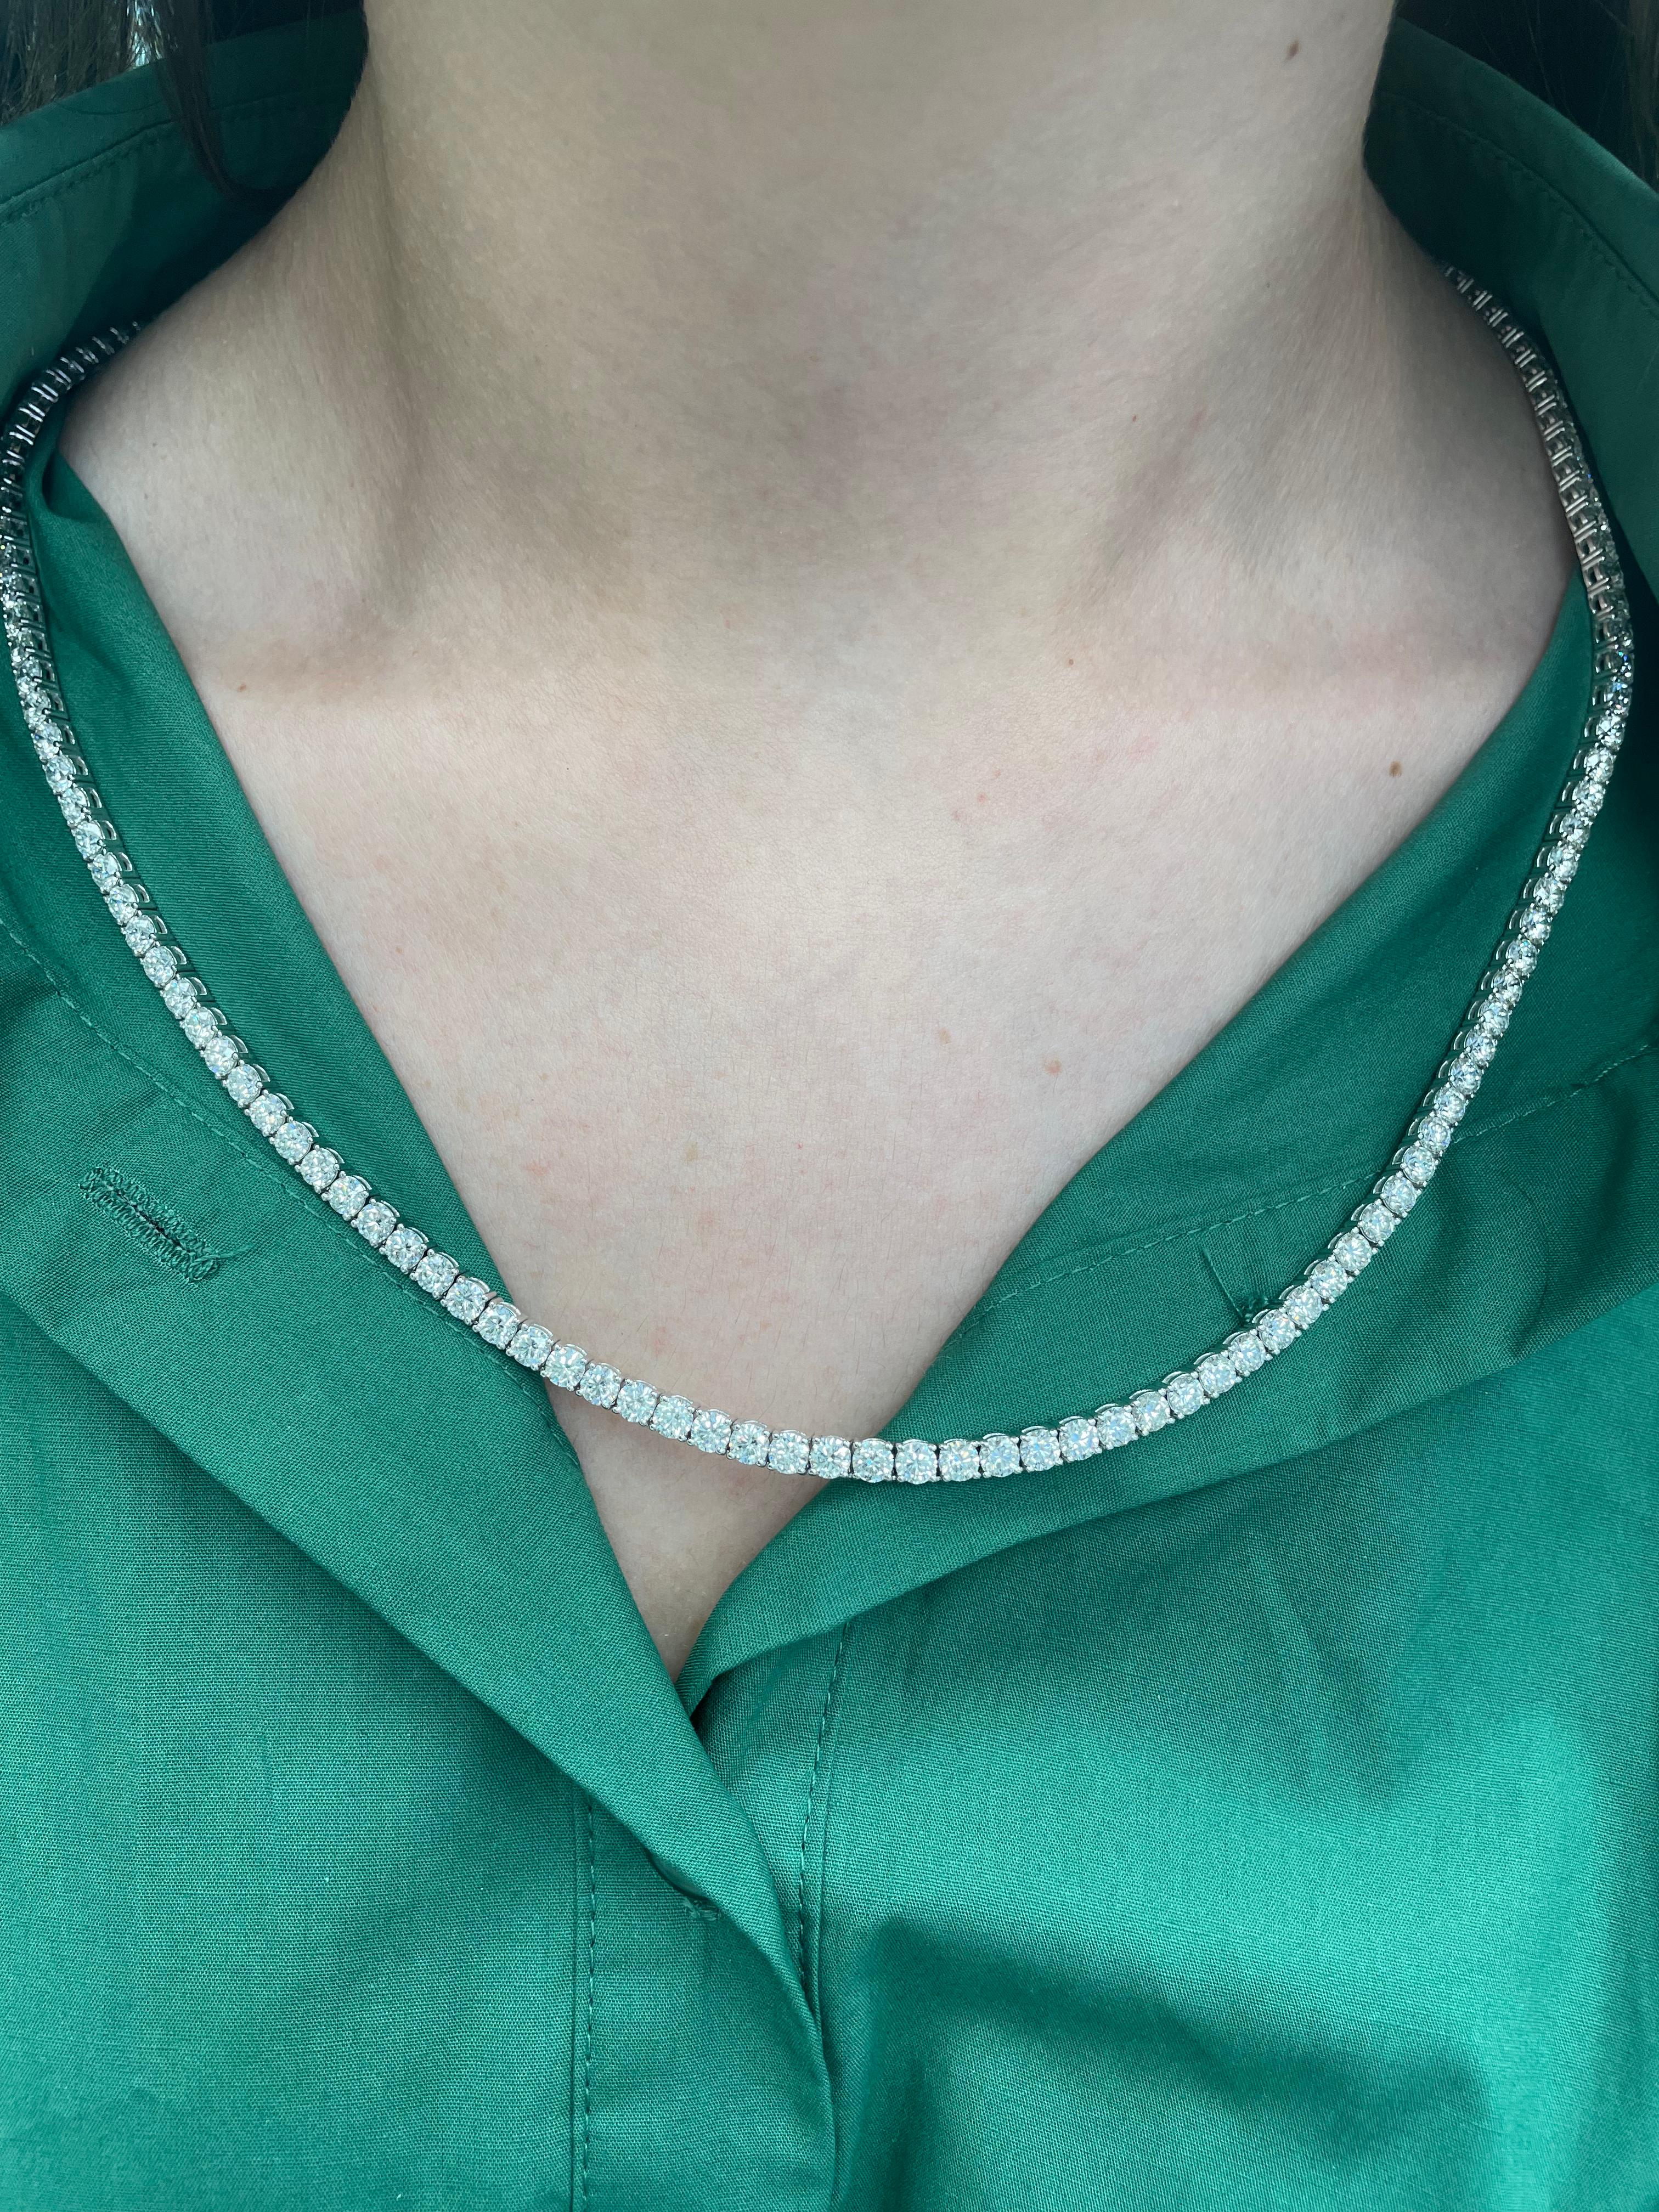 Beautiful and classic long diamond tennis necklace, by Alexander Beverly Hills.
35.55 carats of round brilliant diamonds, approximately G/H color and VS clarity. 18k white gold, 39.30 grams, prong set, 20in.
Accommodated with an up-to-date appraisal